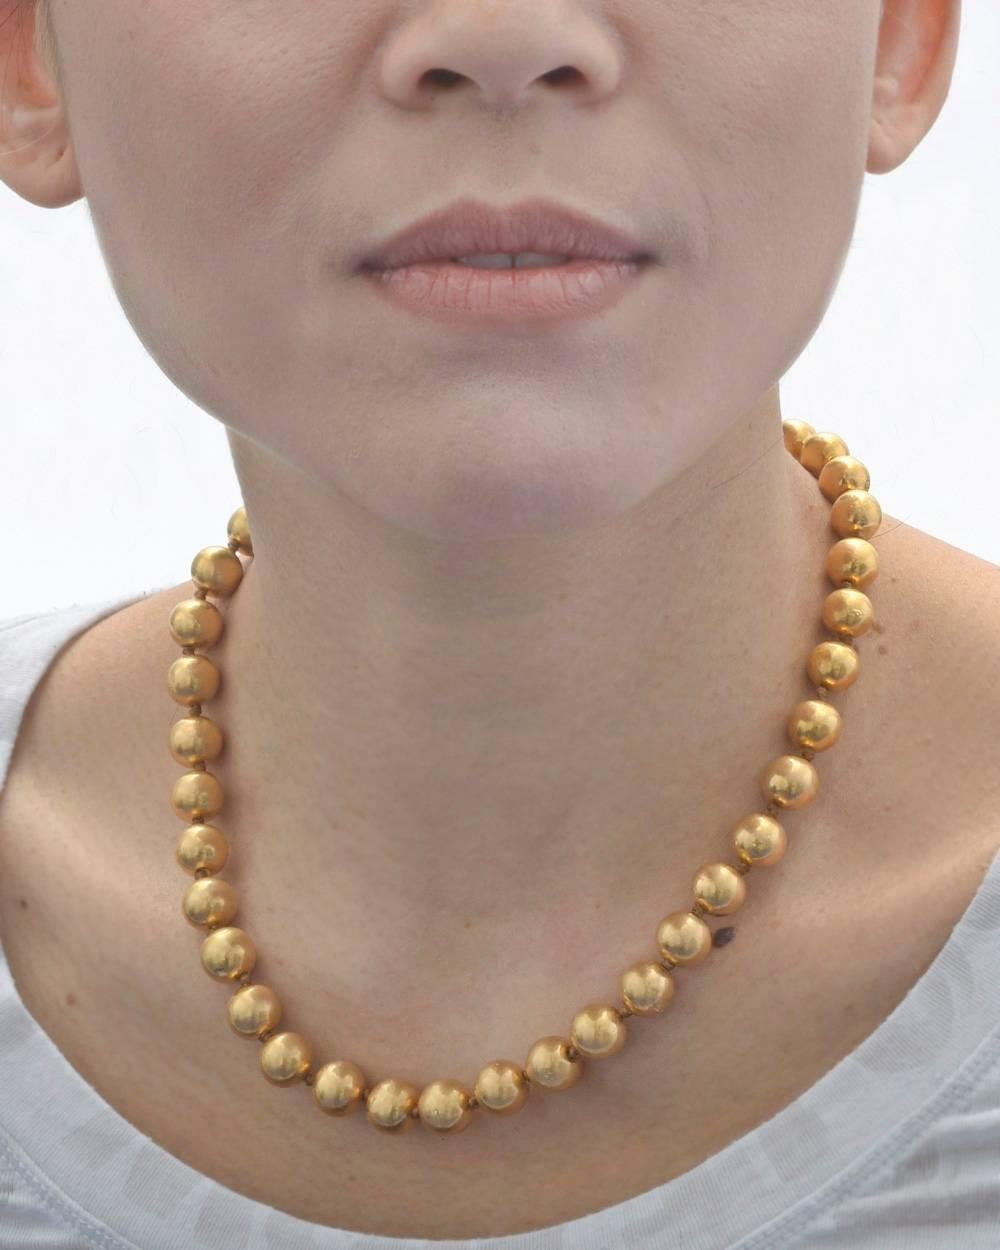 Lightweight 22k yellow gold bead necklace, each 9-10mm bead strung on silk and knotted in place. 17